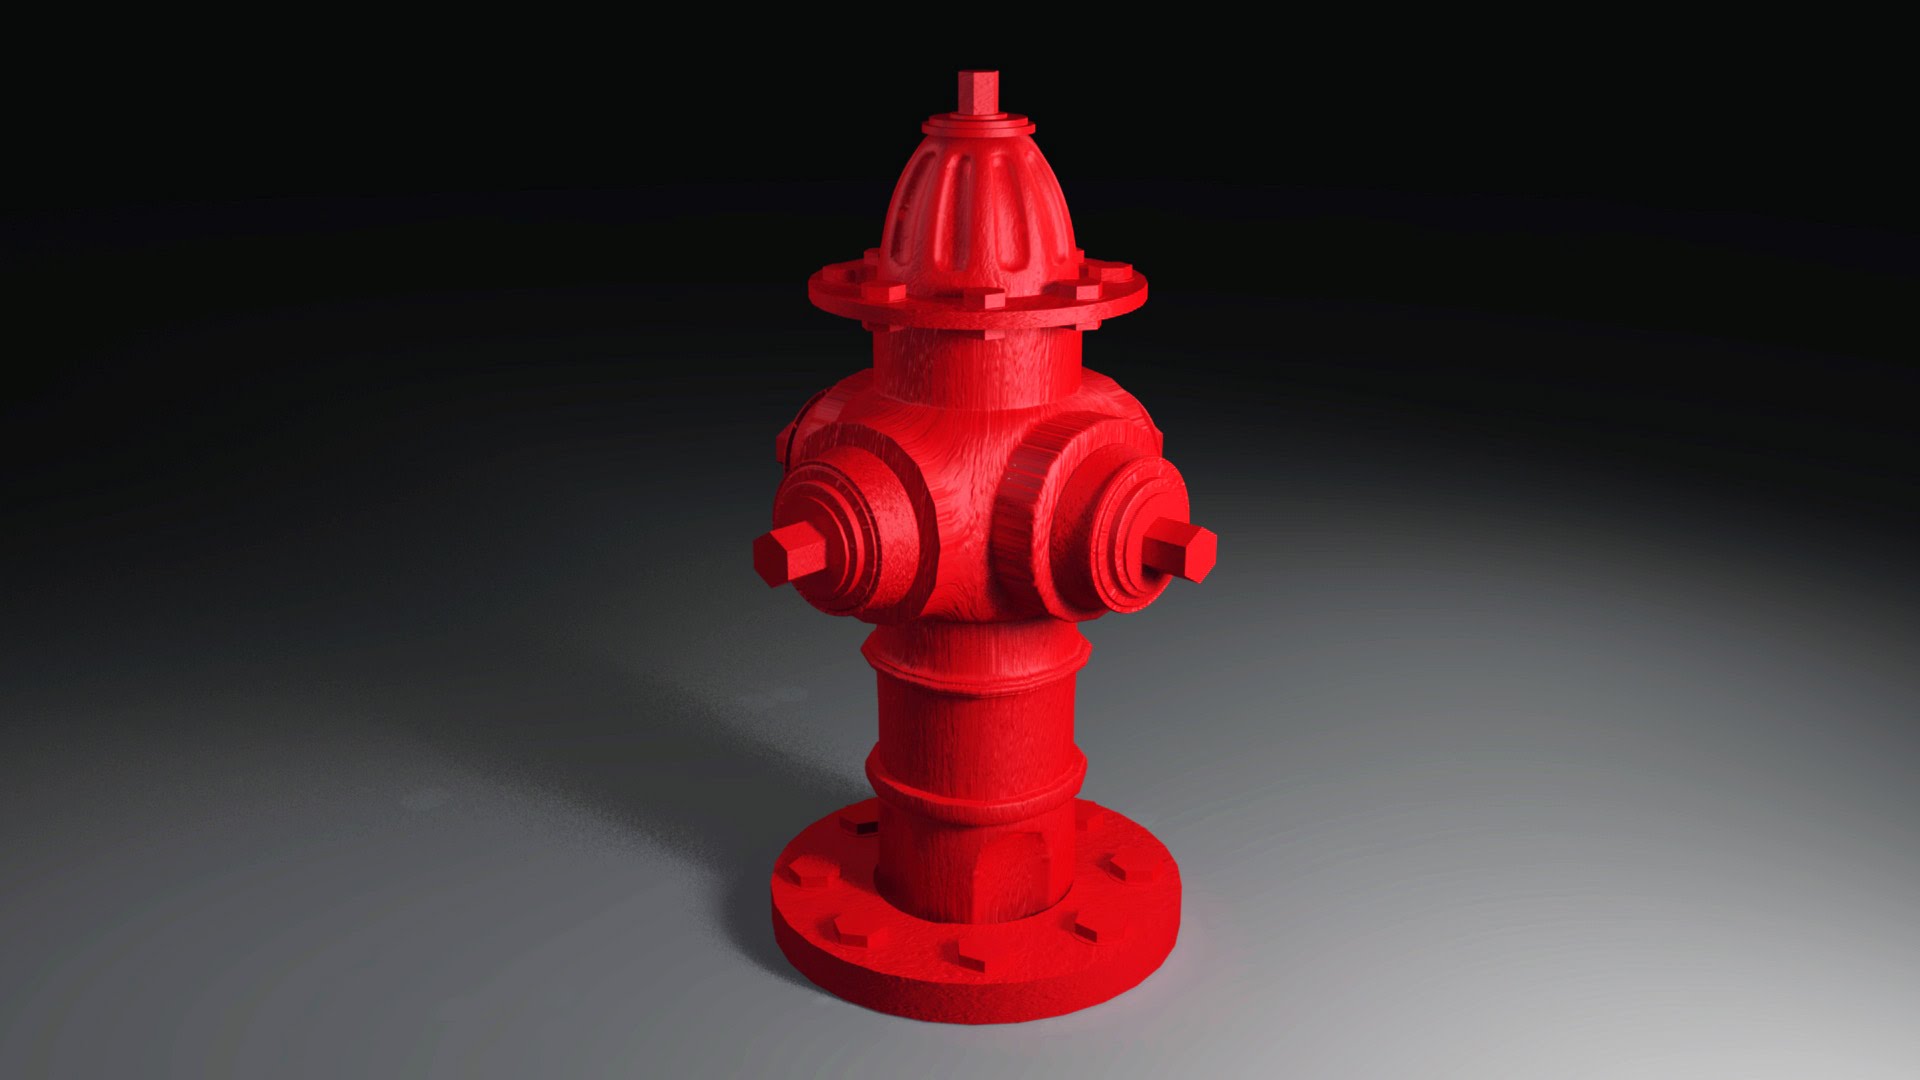 Maya 2016 tutorial : How to model a Fire hydrant - YouTube